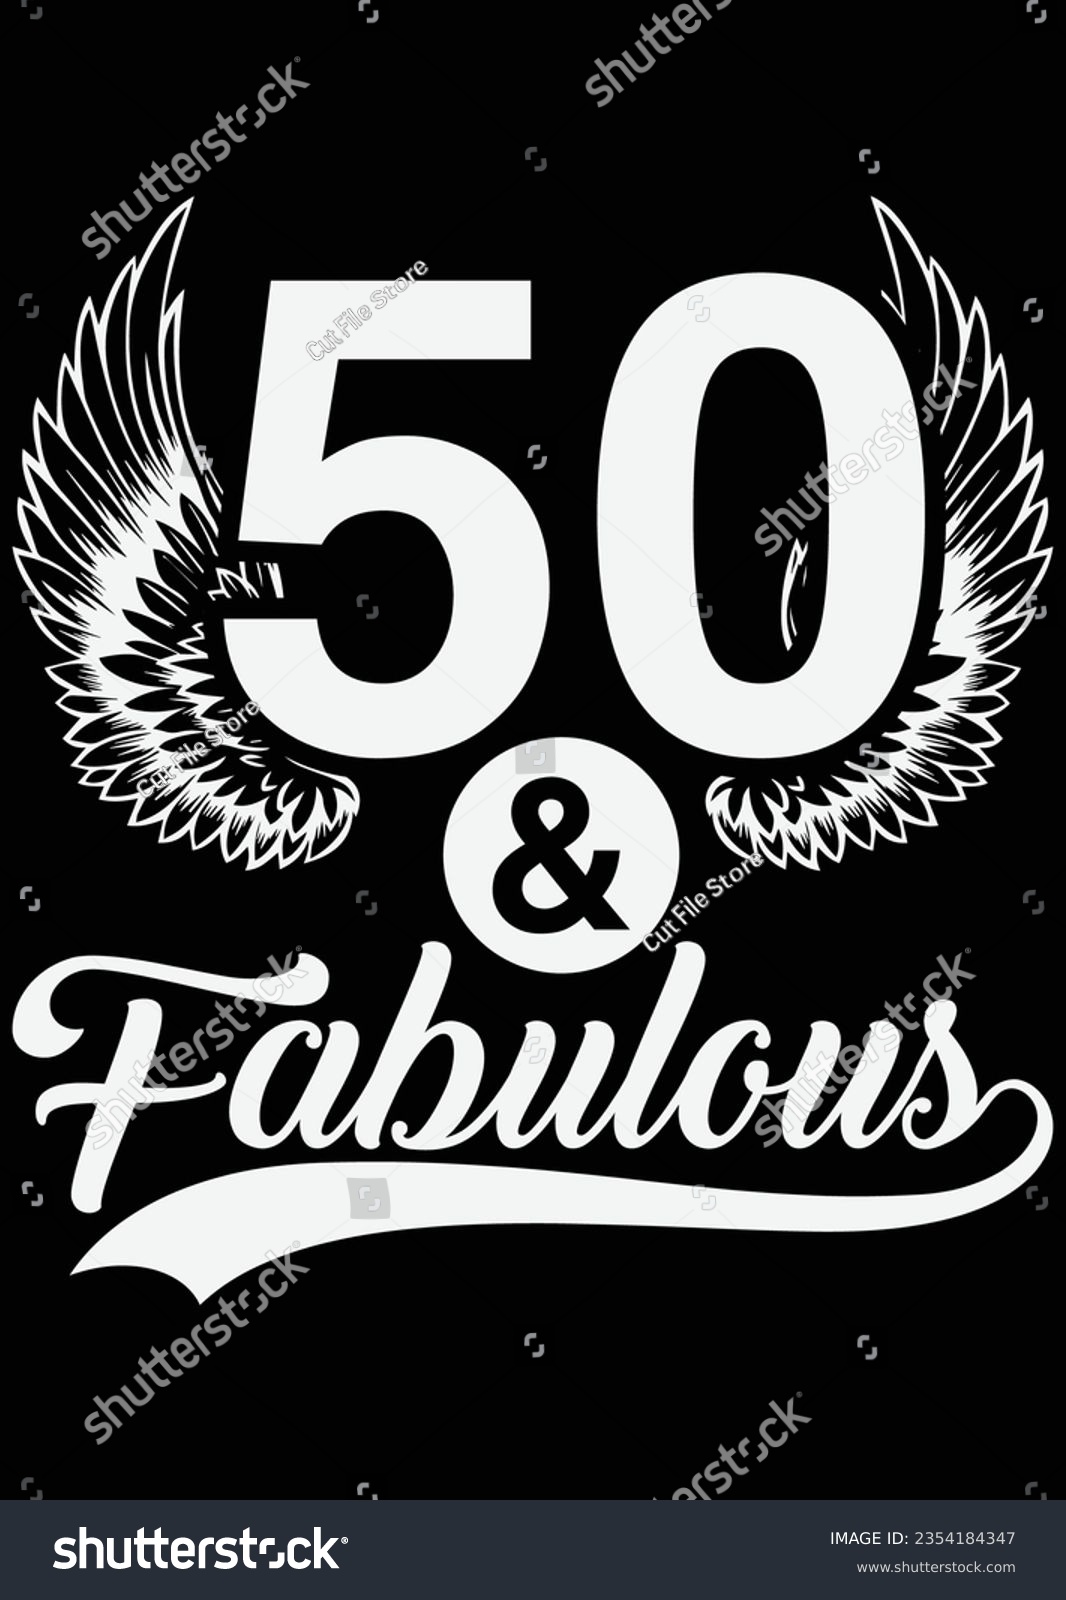 SVG of 50 And Fabulous - Birthday eps cut file for cutting machine svg